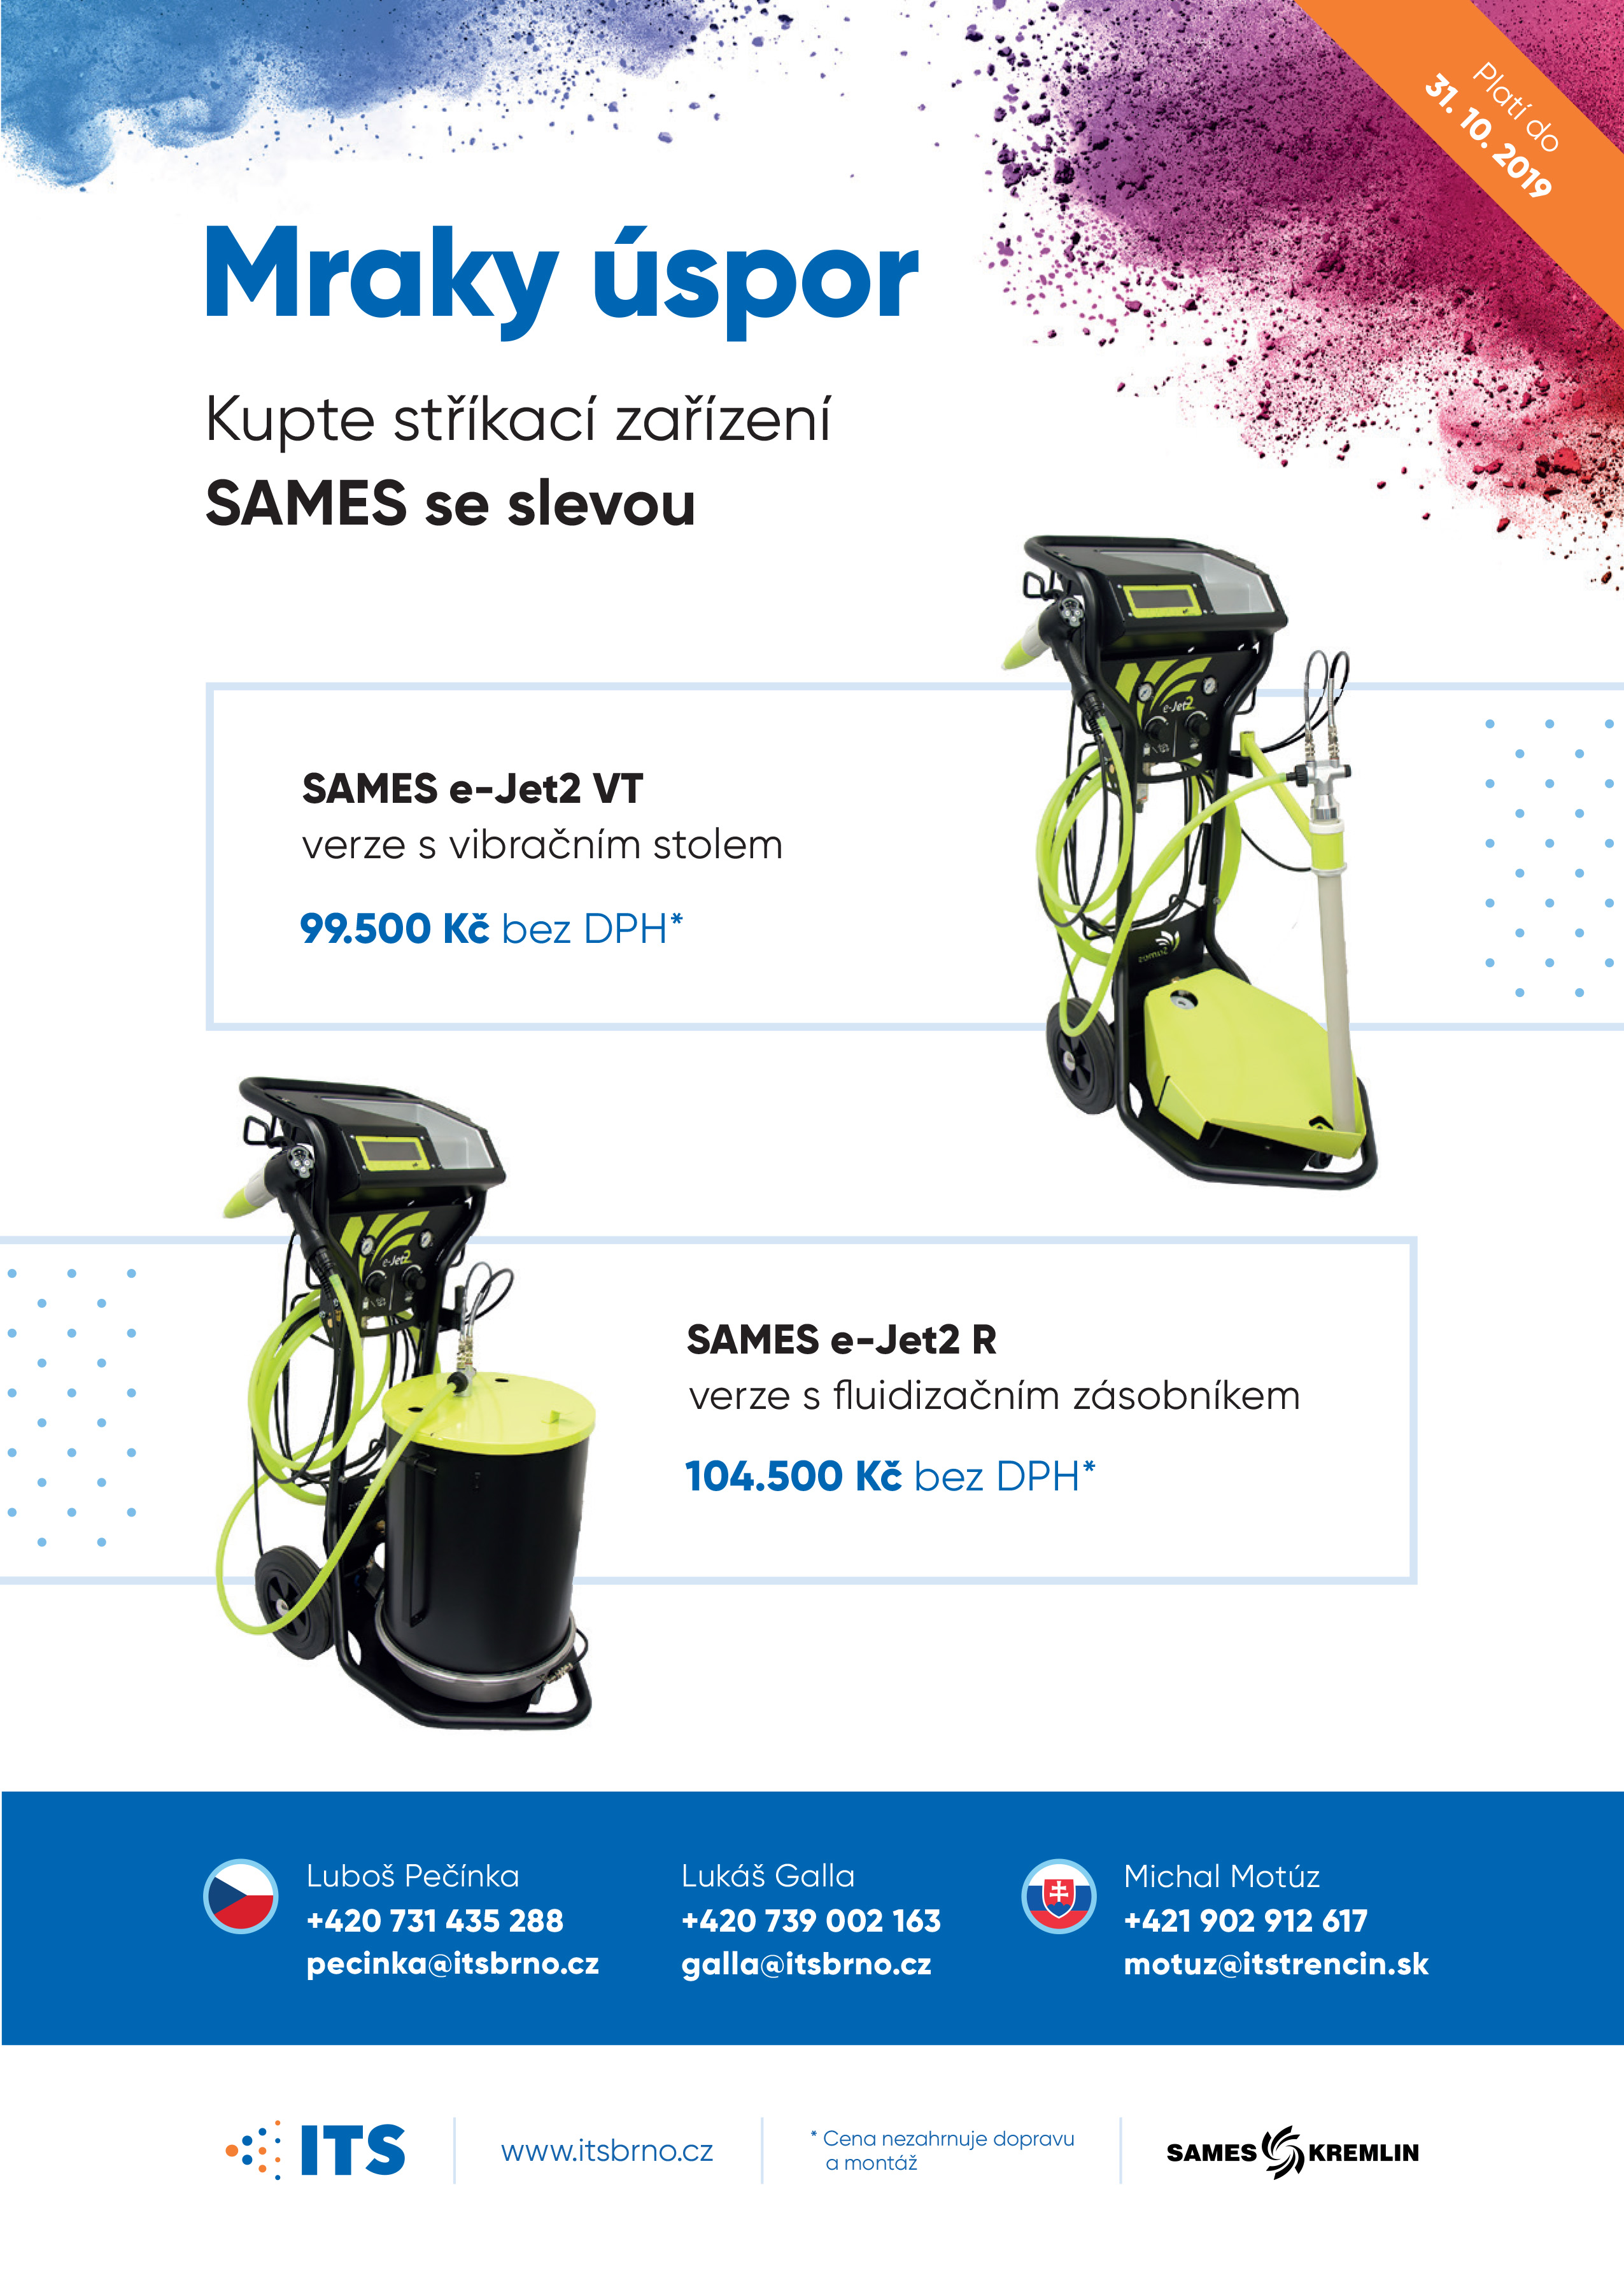 Special prices of Sames spraying equipment